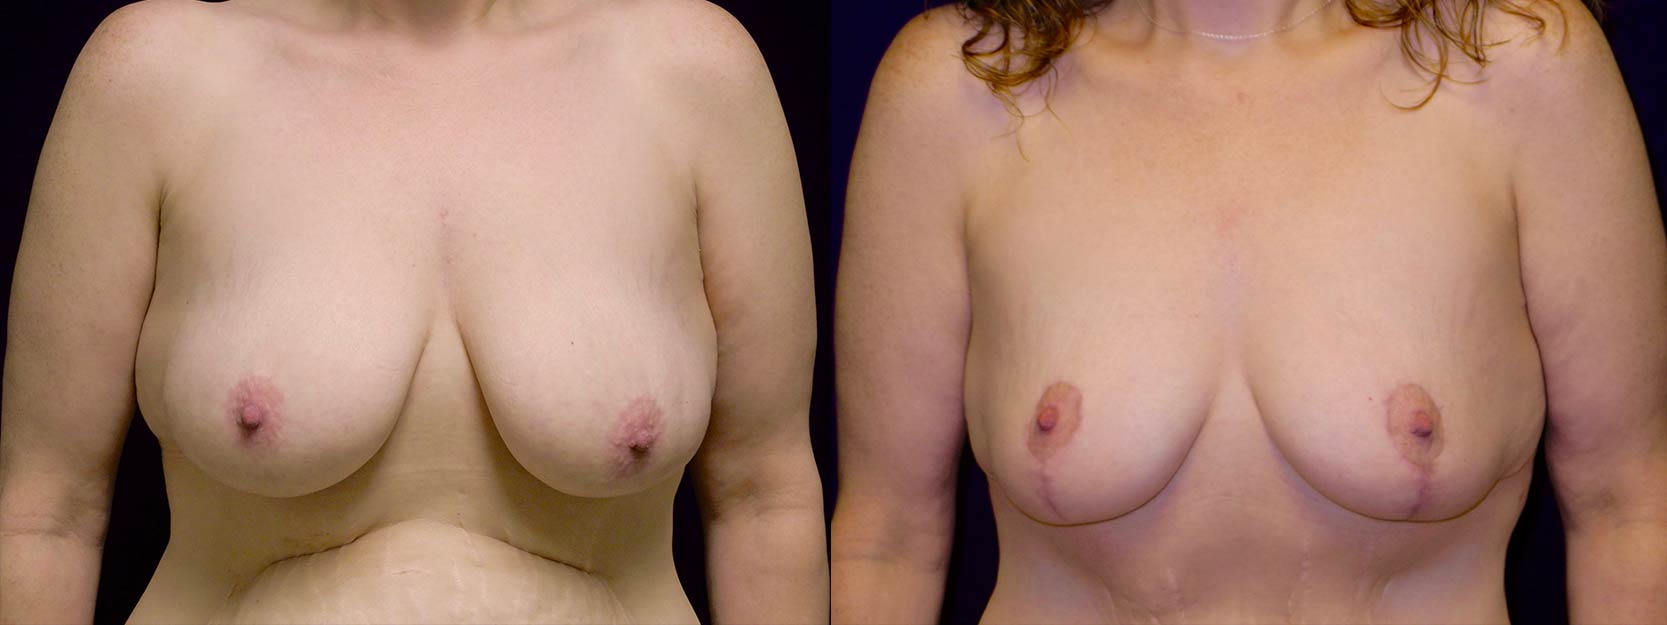 Frontal View - Breast Lift After Weight Loss